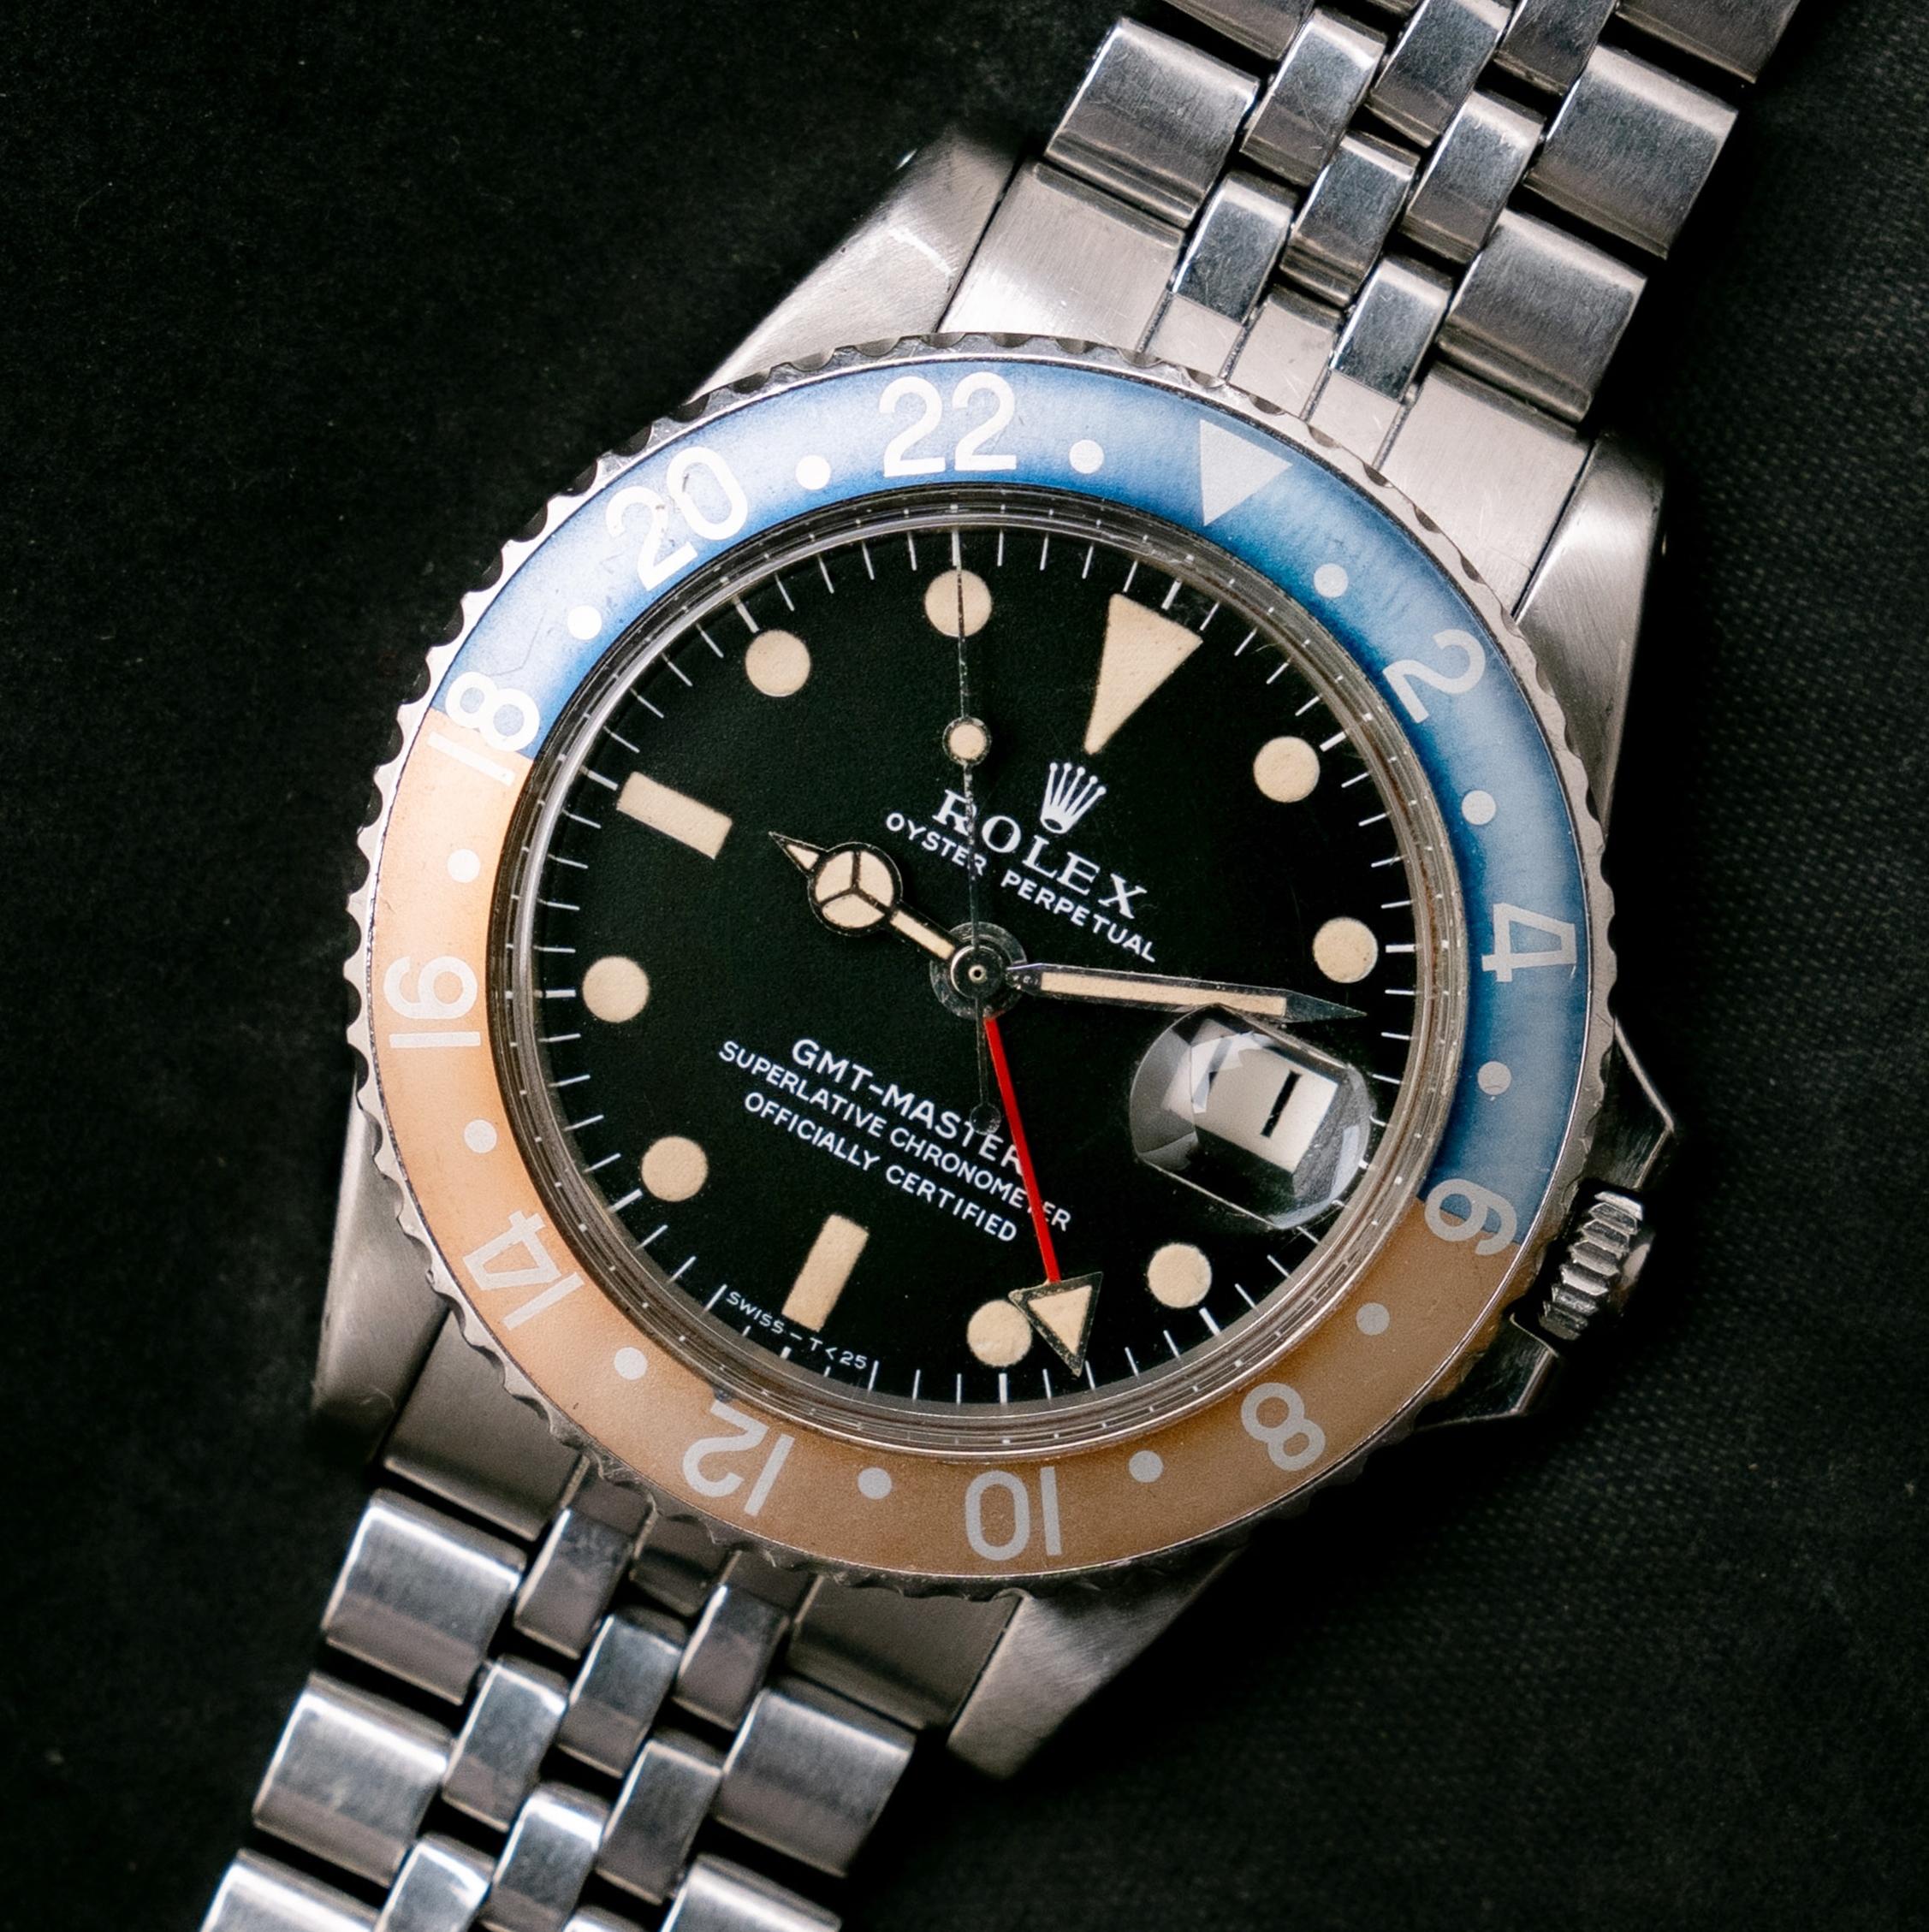 Brand: Vintage Rolex
Model: 1675
Year: 1968
Serial number: 20xxxxx
Reference: OT1470

Case: Show sign of wear with slight polish from previous; inner case back stamped 1675 IV.68

Dial: Excellent Aged Condition Tritium Dial where the lumes has